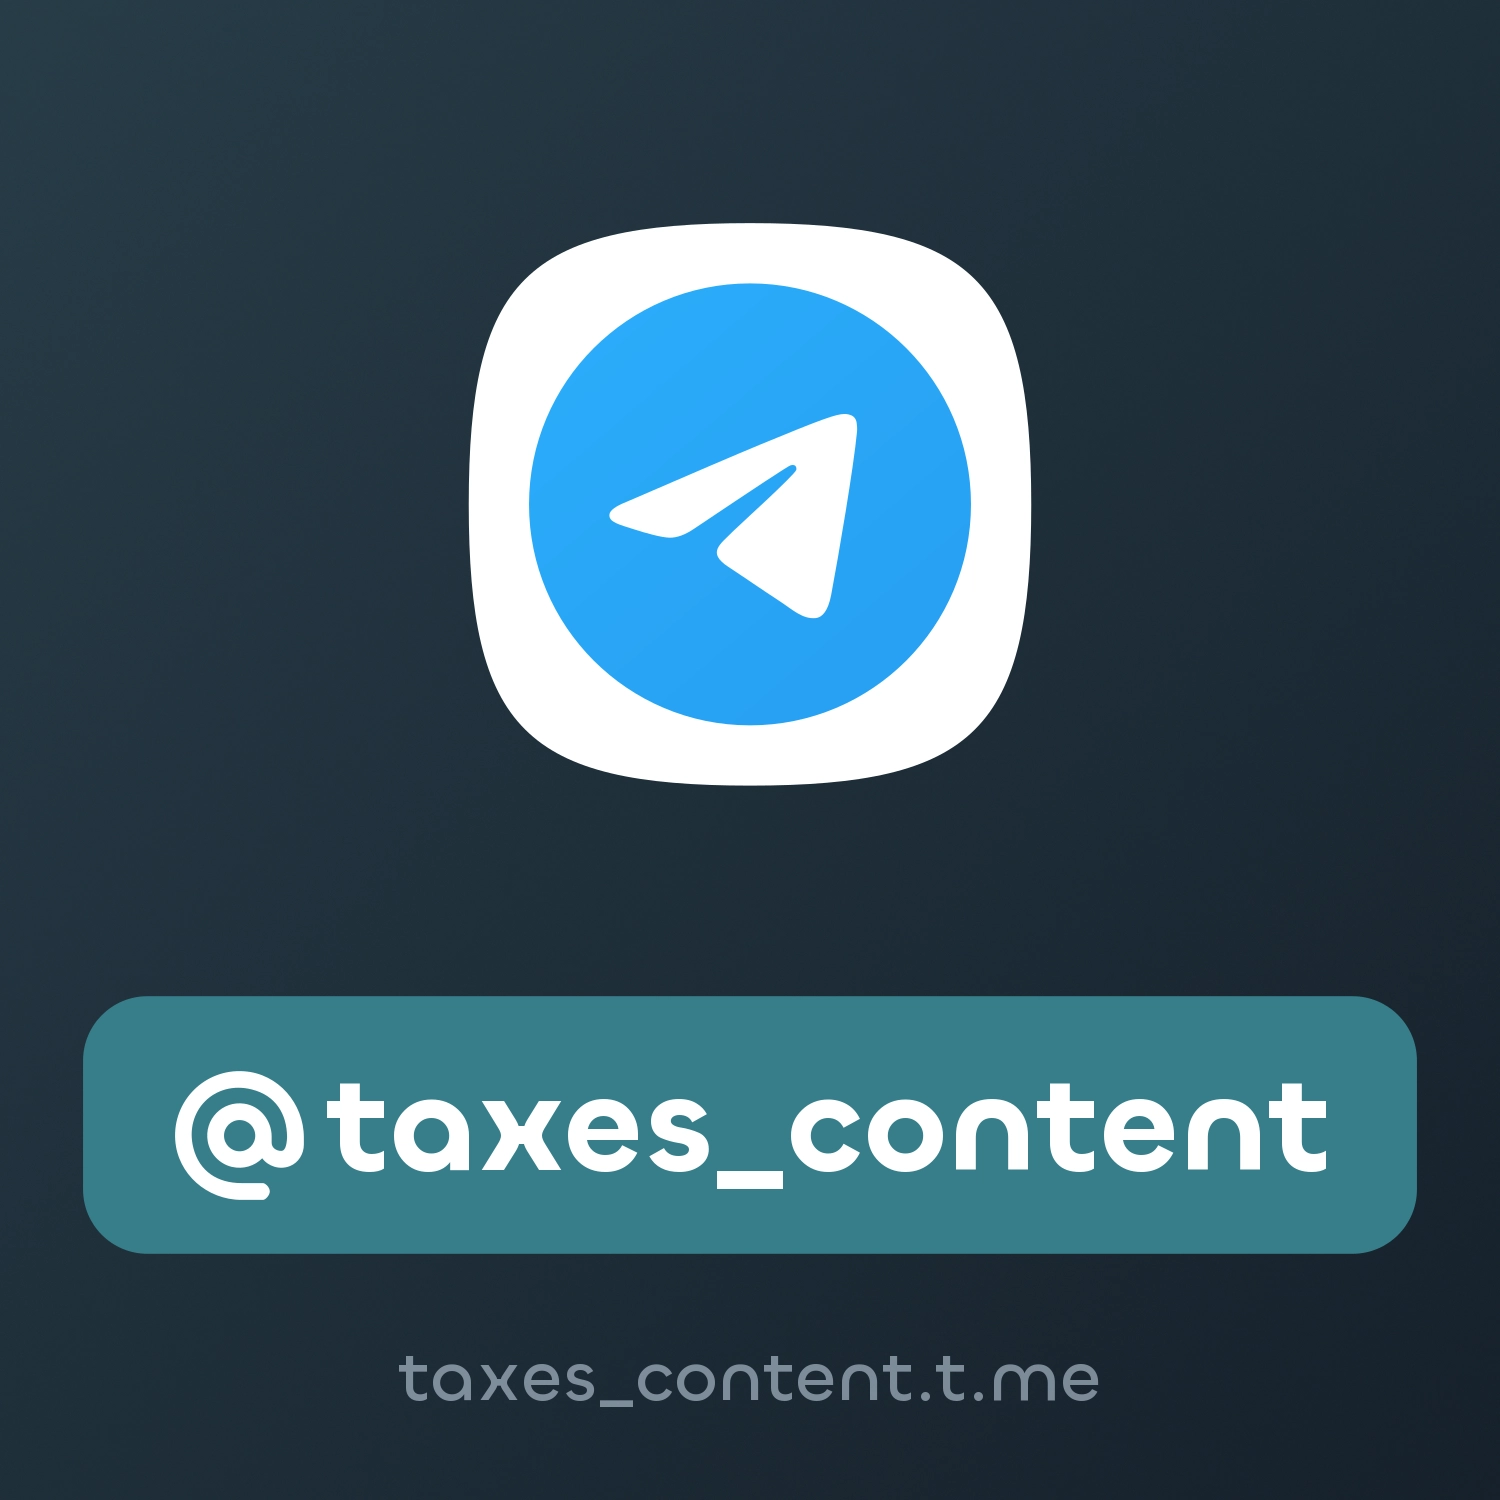 @taxes_content